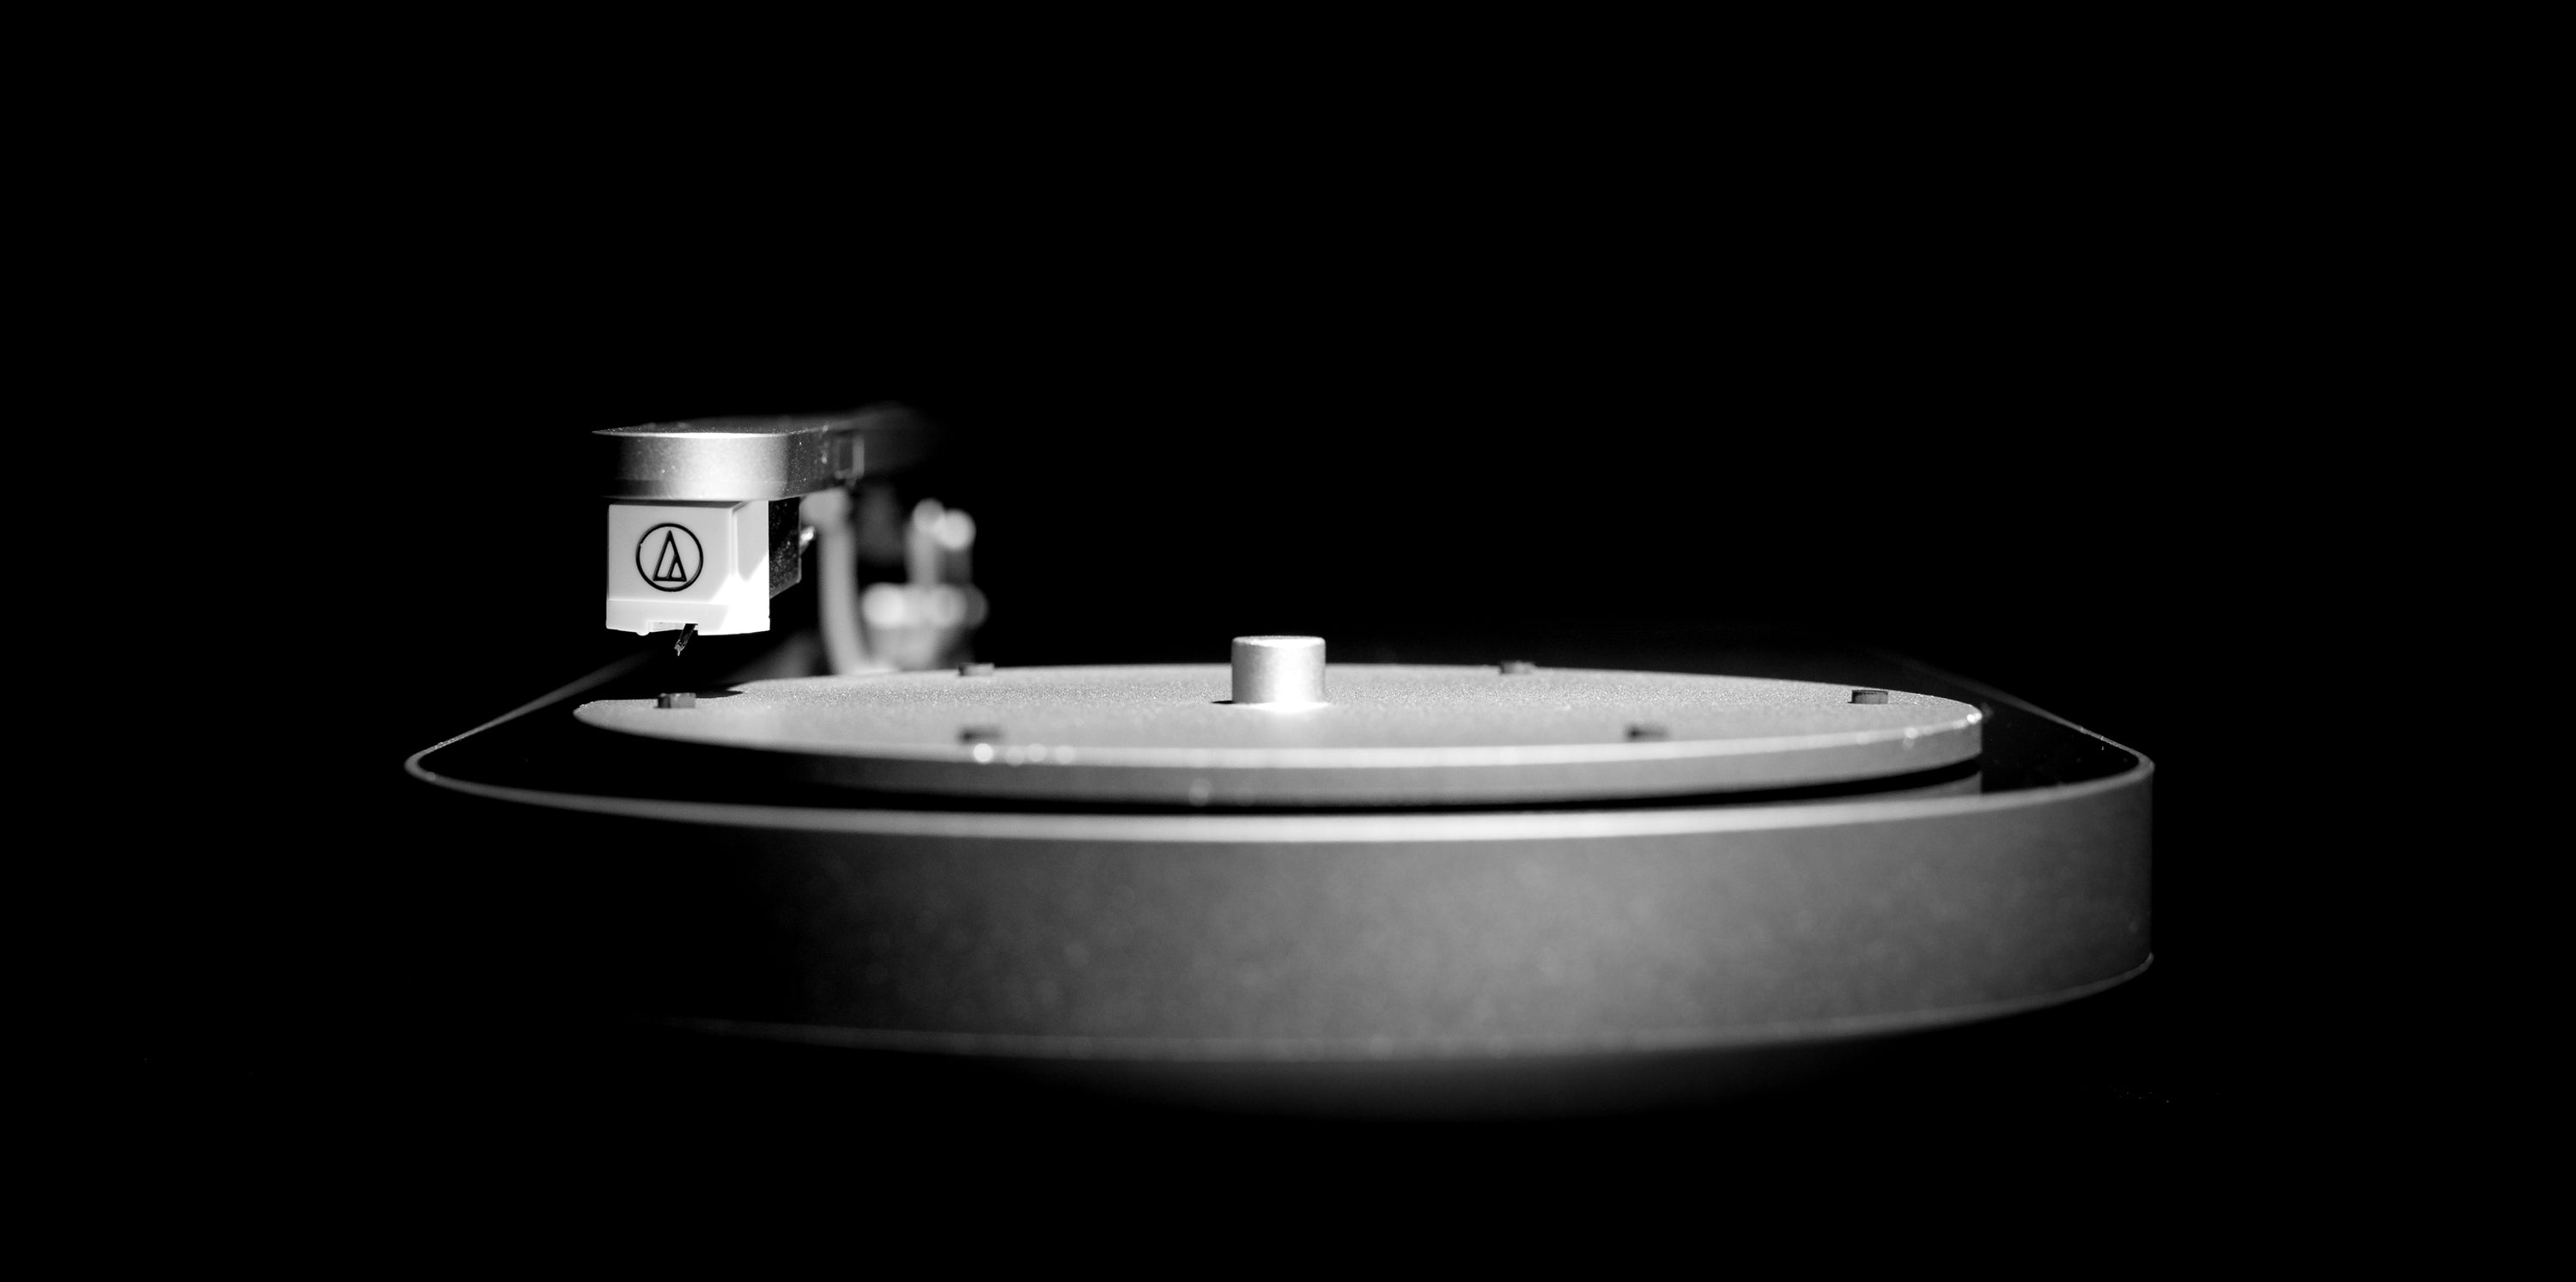 Portable Bluetooth Turntable – Coturn CT-01 Grey